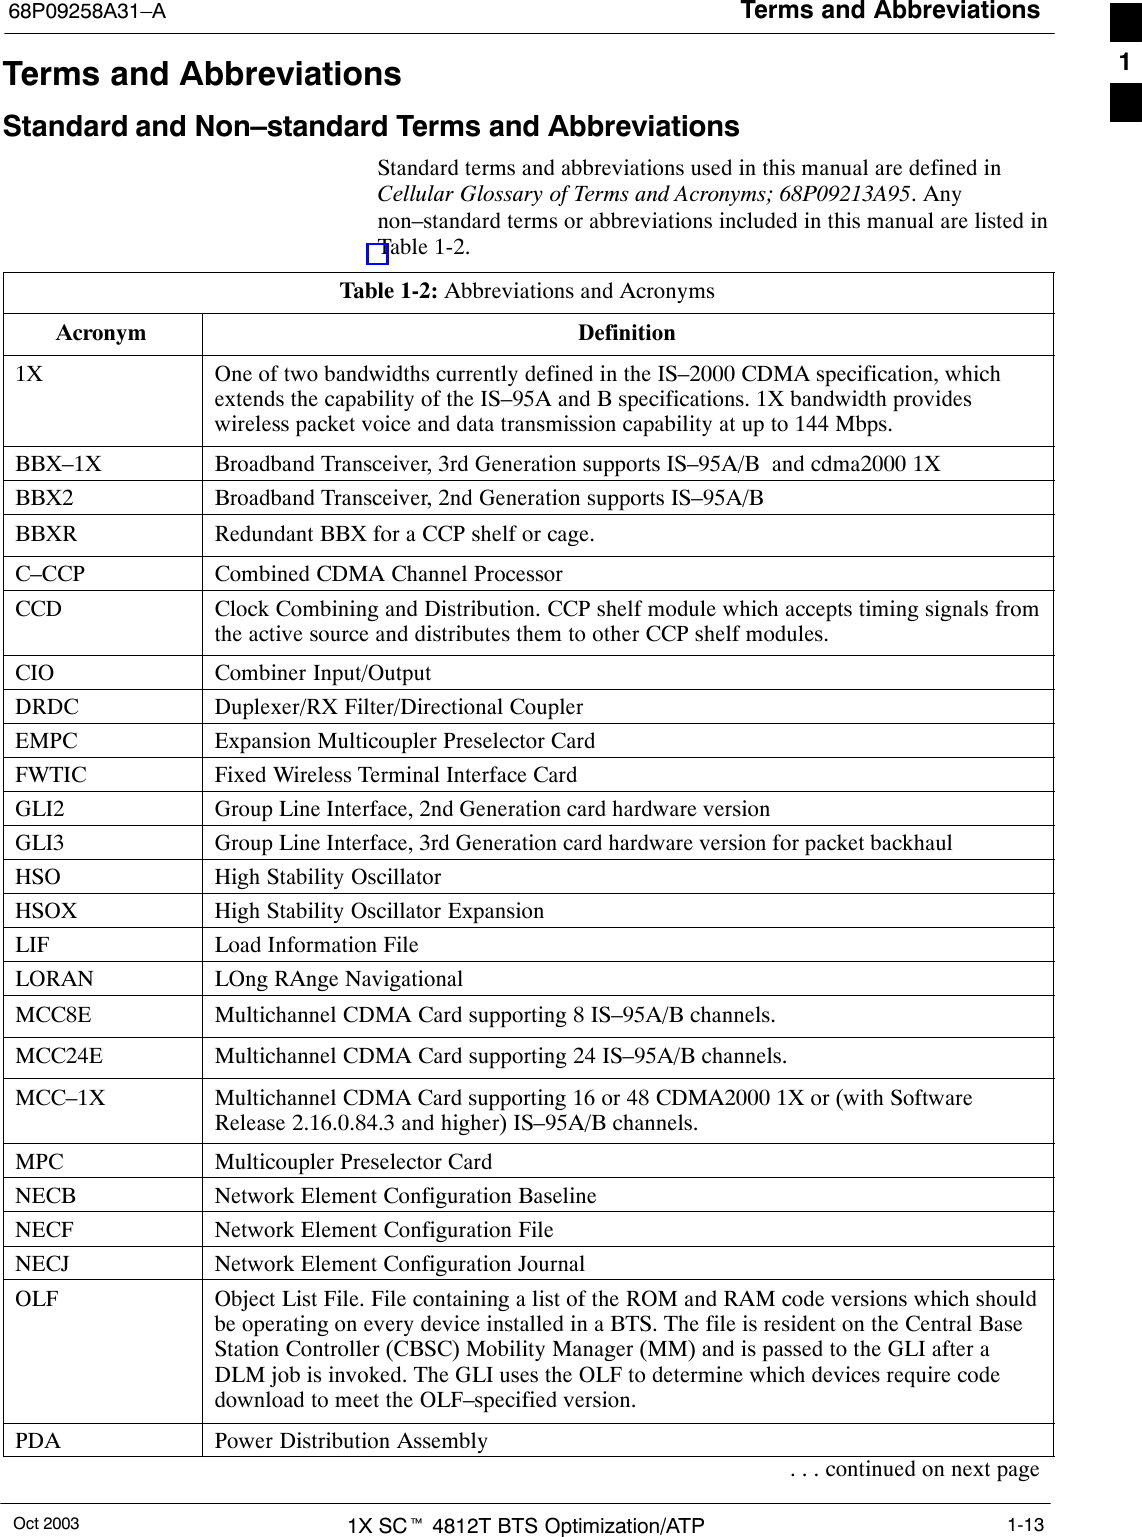 Terms and Abbreviations68P09258A31–AOct 2003 1X SCt 4812T BTS Optimization/ATP 1-13Terms and AbbreviationsStandard and Non–standard Terms and AbbreviationsStandard terms and abbreviations used in this manual are defined inCellular Glossary of Terms and Acronyms; 68P09213A95. Anynon–standard terms or abbreviations included in this manual are listed inTable 1-2.Table 1-2: Abbreviations and AcronymsAcronym Definition1X One of two bandwidths currently defined in the IS–2000 CDMA specification, whichextends the capability of the IS–95A and B specifications. 1X bandwidth provideswireless packet voice and data transmission capability at up to 144 Mbps.BBX–1X Broadband Transceiver, 3rd Generation supports IS–95A/B  and cdma2000 1XBBX2 Broadband Transceiver, 2nd Generation supports IS–95A/BBBXR Redundant BBX for a CCP shelf or cage.C–CCP Combined CDMA Channel ProcessorCCD Clock Combining and Distribution. CCP shelf module which accepts timing signals fromthe active source and distributes them to other CCP shelf modules.CIO Combiner Input/OutputDRDC Duplexer/RX Filter/Directional CouplerEMPC Expansion Multicoupler Preselector CardFWTIC Fixed Wireless Terminal Interface CardGLI2 Group Line Interface, 2nd Generation card hardware versionGLI3 Group Line Interface, 3rd Generation card hardware version for packet backhaulHSO High Stability OscillatorHSOX High Stability Oscillator ExpansionLIF Load Information FileLORAN LOng RAnge NavigationalMCC8E Multichannel CDMA Card supporting 8 IS–95A/B channels.MCC24E Multichannel CDMA Card supporting 24 IS–95A/B channels.MCC–1X Multichannel CDMA Card supporting 16 or 48 CDMA2000 1X or (with SoftwareRelease 2.16.0.84.3 and higher) IS–95A/B channels.MPC Multicoupler Preselector CardNECB Network Element Configuration BaselineNECF Network Element Configuration FileNECJ Network Element Configuration JournalOLF Object List File. File containing a list of the ROM and RAM code versions which shouldbe operating on every device installed in a BTS. The file is resident on the Central BaseStation Controller (CBSC) Mobility Manager (MM) and is passed to the GLI after aDLM job is invoked. The GLI uses the OLF to determine which devices require codedownload to meet the OLF–specified version.PDA Power Distribution Assembly. . . continued on next page1